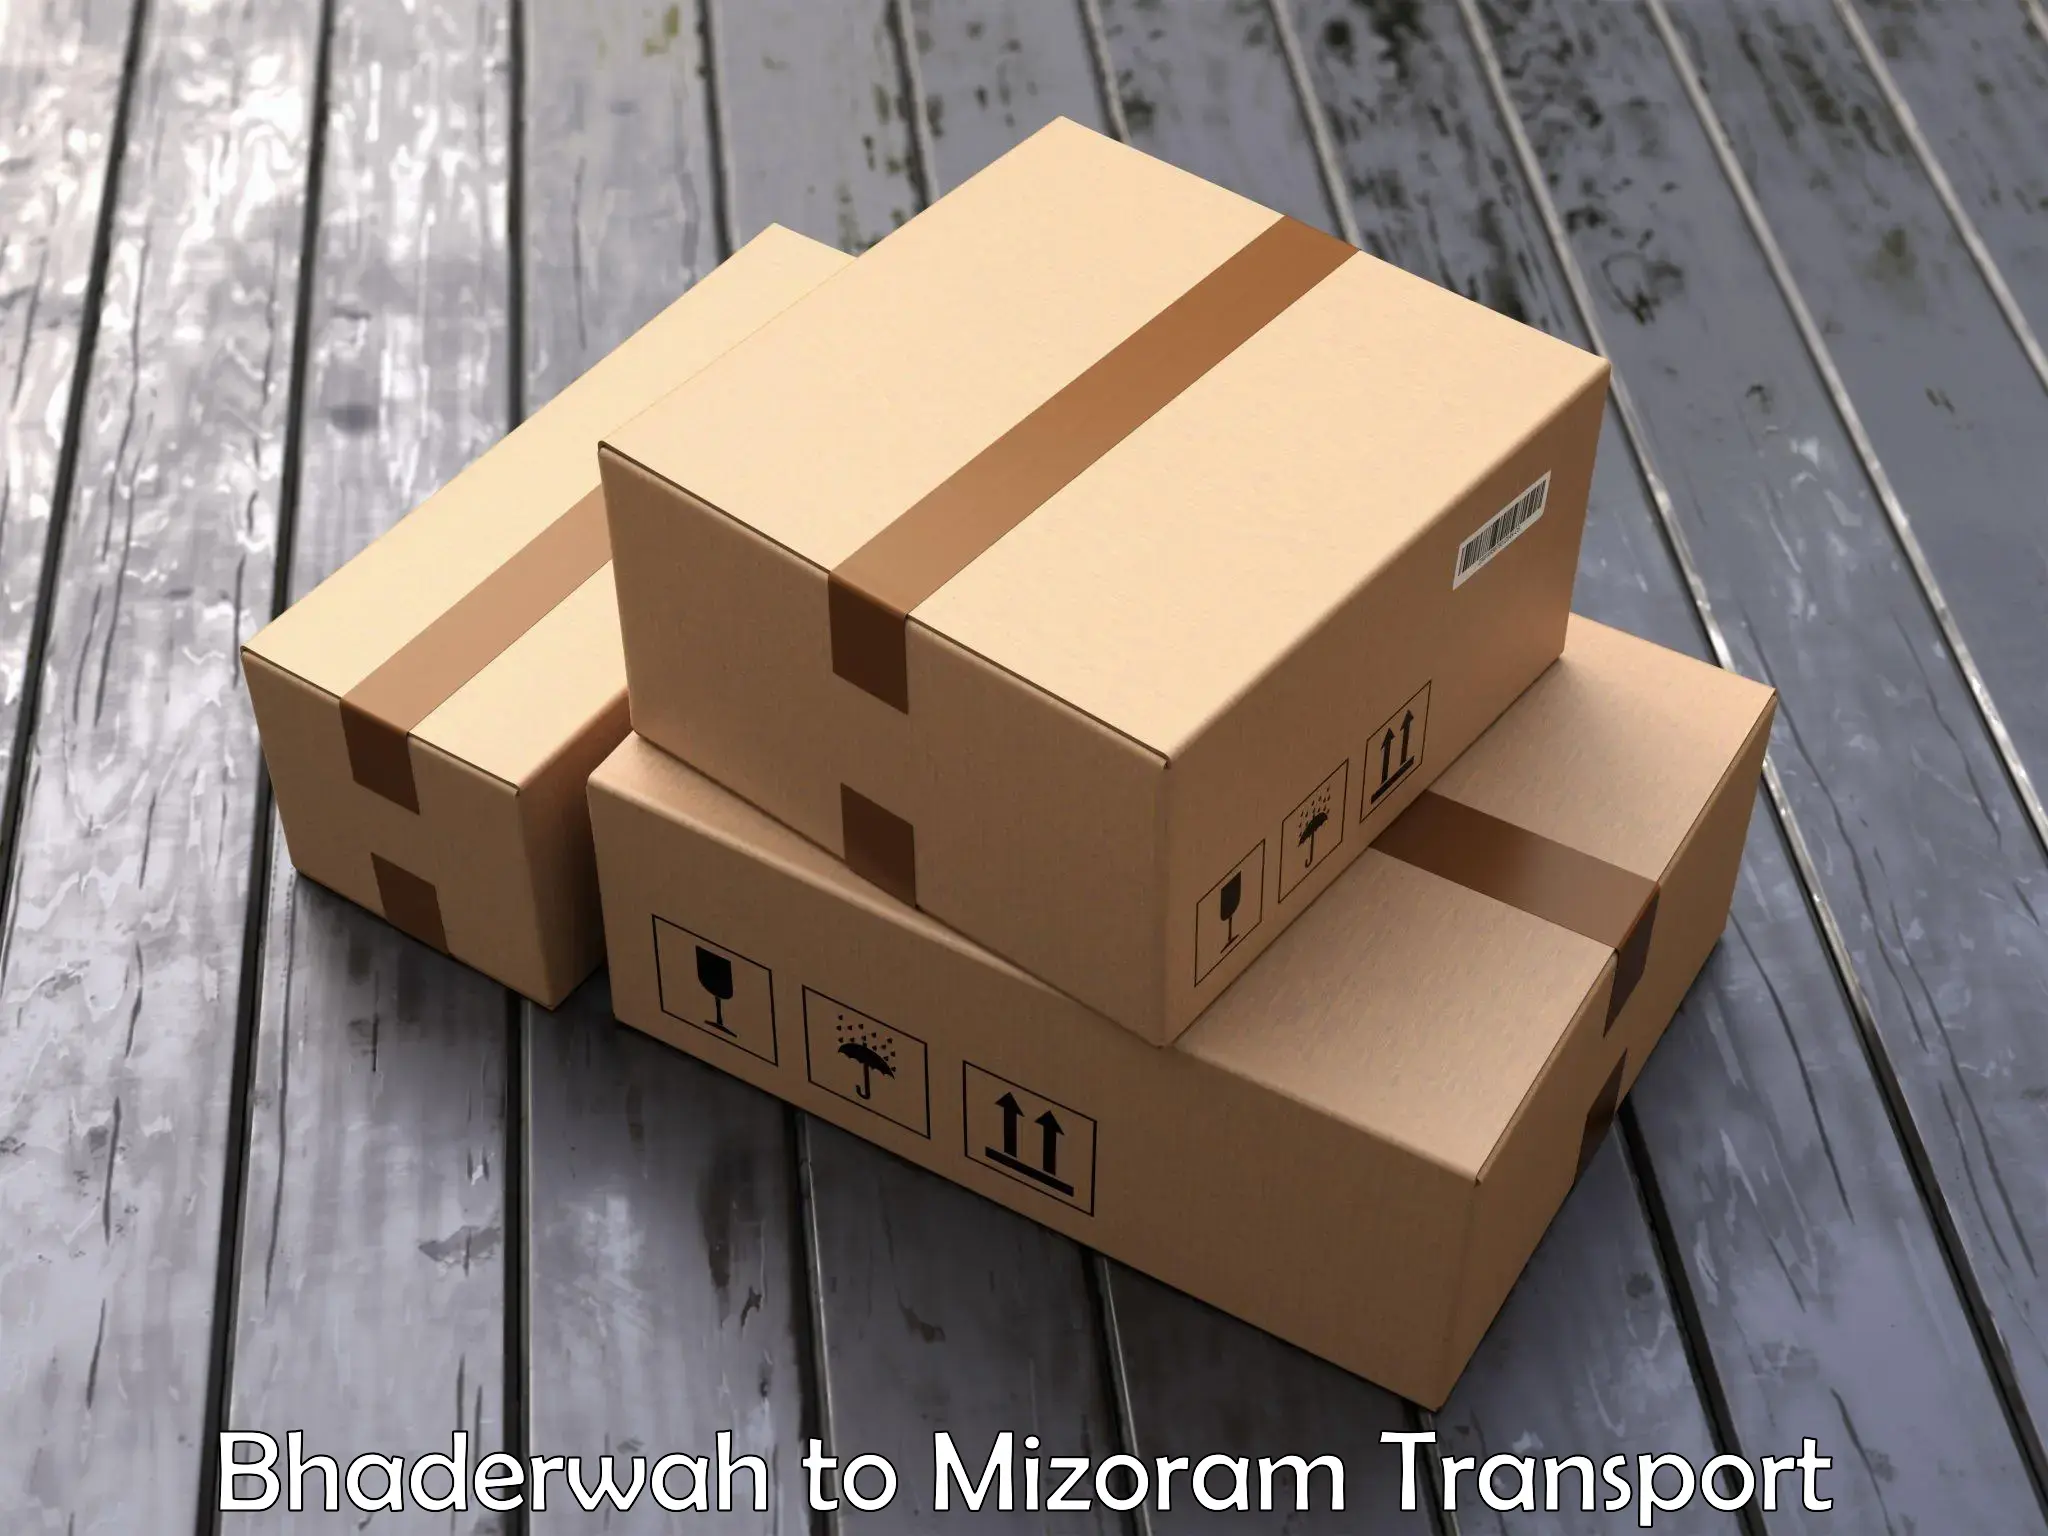 Delivery service Bhaderwah to Mizoram